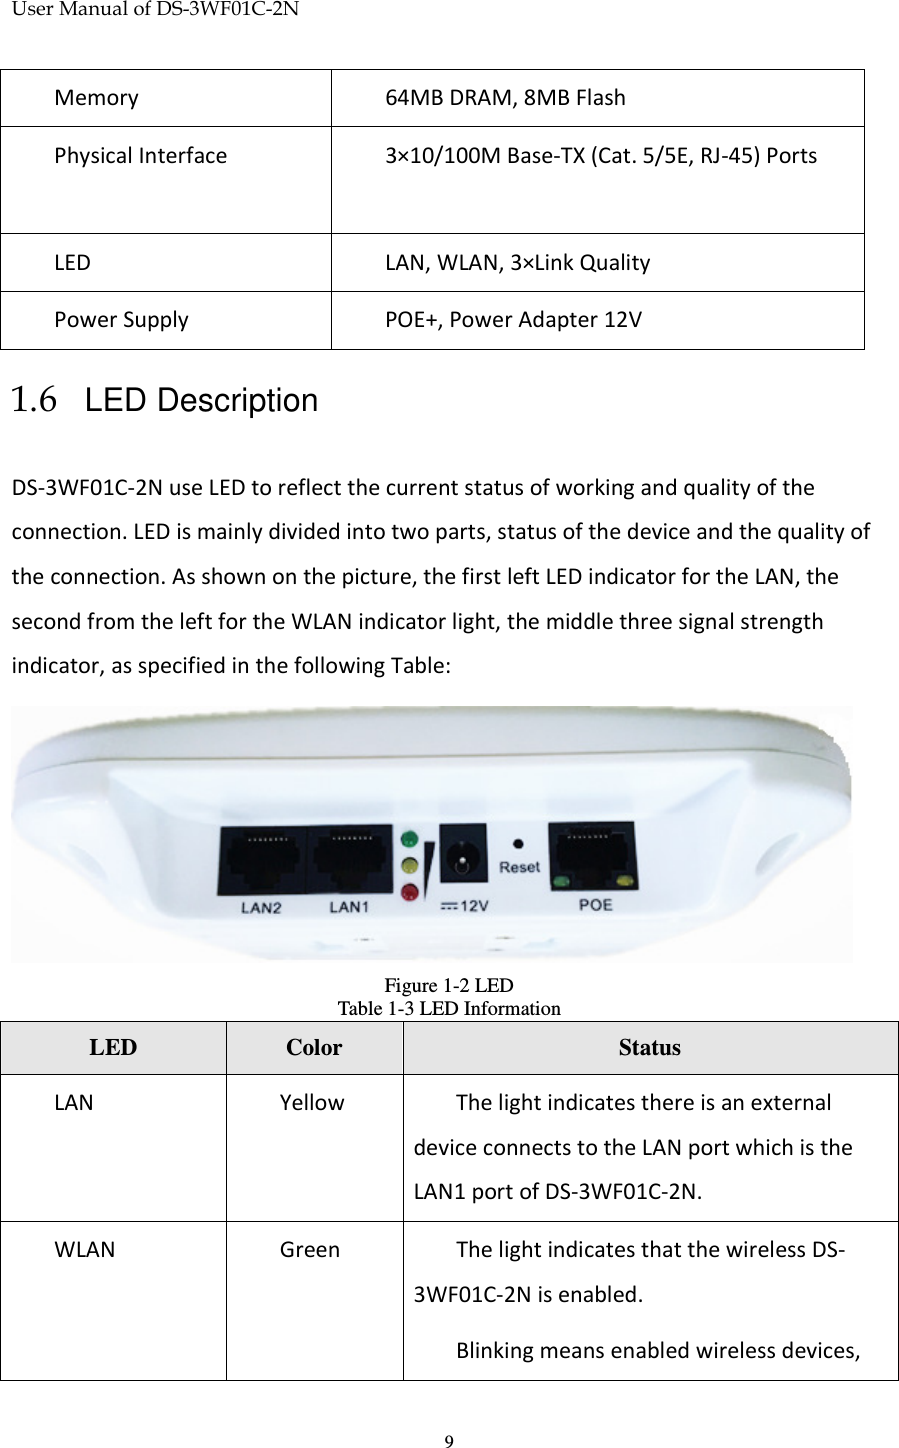 User Manual of DS-3WF01C-2N   9Memory  64MB DRAM, 8MB Flash Physical Interface  3×10/100M Base-TX (Cat. 5/5E, RJ-45) Ports LED  LAN, WLAN, 3×Link Quality Power Supply  POE+, Power Adapter 12V 1.6 LED Description DS-3WF01C-2N use LED to reflect the current status of working and quality of the connection. LED is mainly divided into two parts, status of the device and the quality of the connection. As shown on the picture, the first left LED indicator for the LAN, the second from the left for the WLAN indicator light, the middle three signal strength indicator, as specified in the following Table:  Figure 1-2 LED Table 1-3 LED Information LED  Color  Status LAN  Yellow  The light indicates there is an external device connects to the LAN port which is the LAN1 port of DS-3WF01C-2N. WLAN  Green  The light indicates that the wireless DS-3WF01C-2N is enabled. Blinking means enabled wireless devices, 